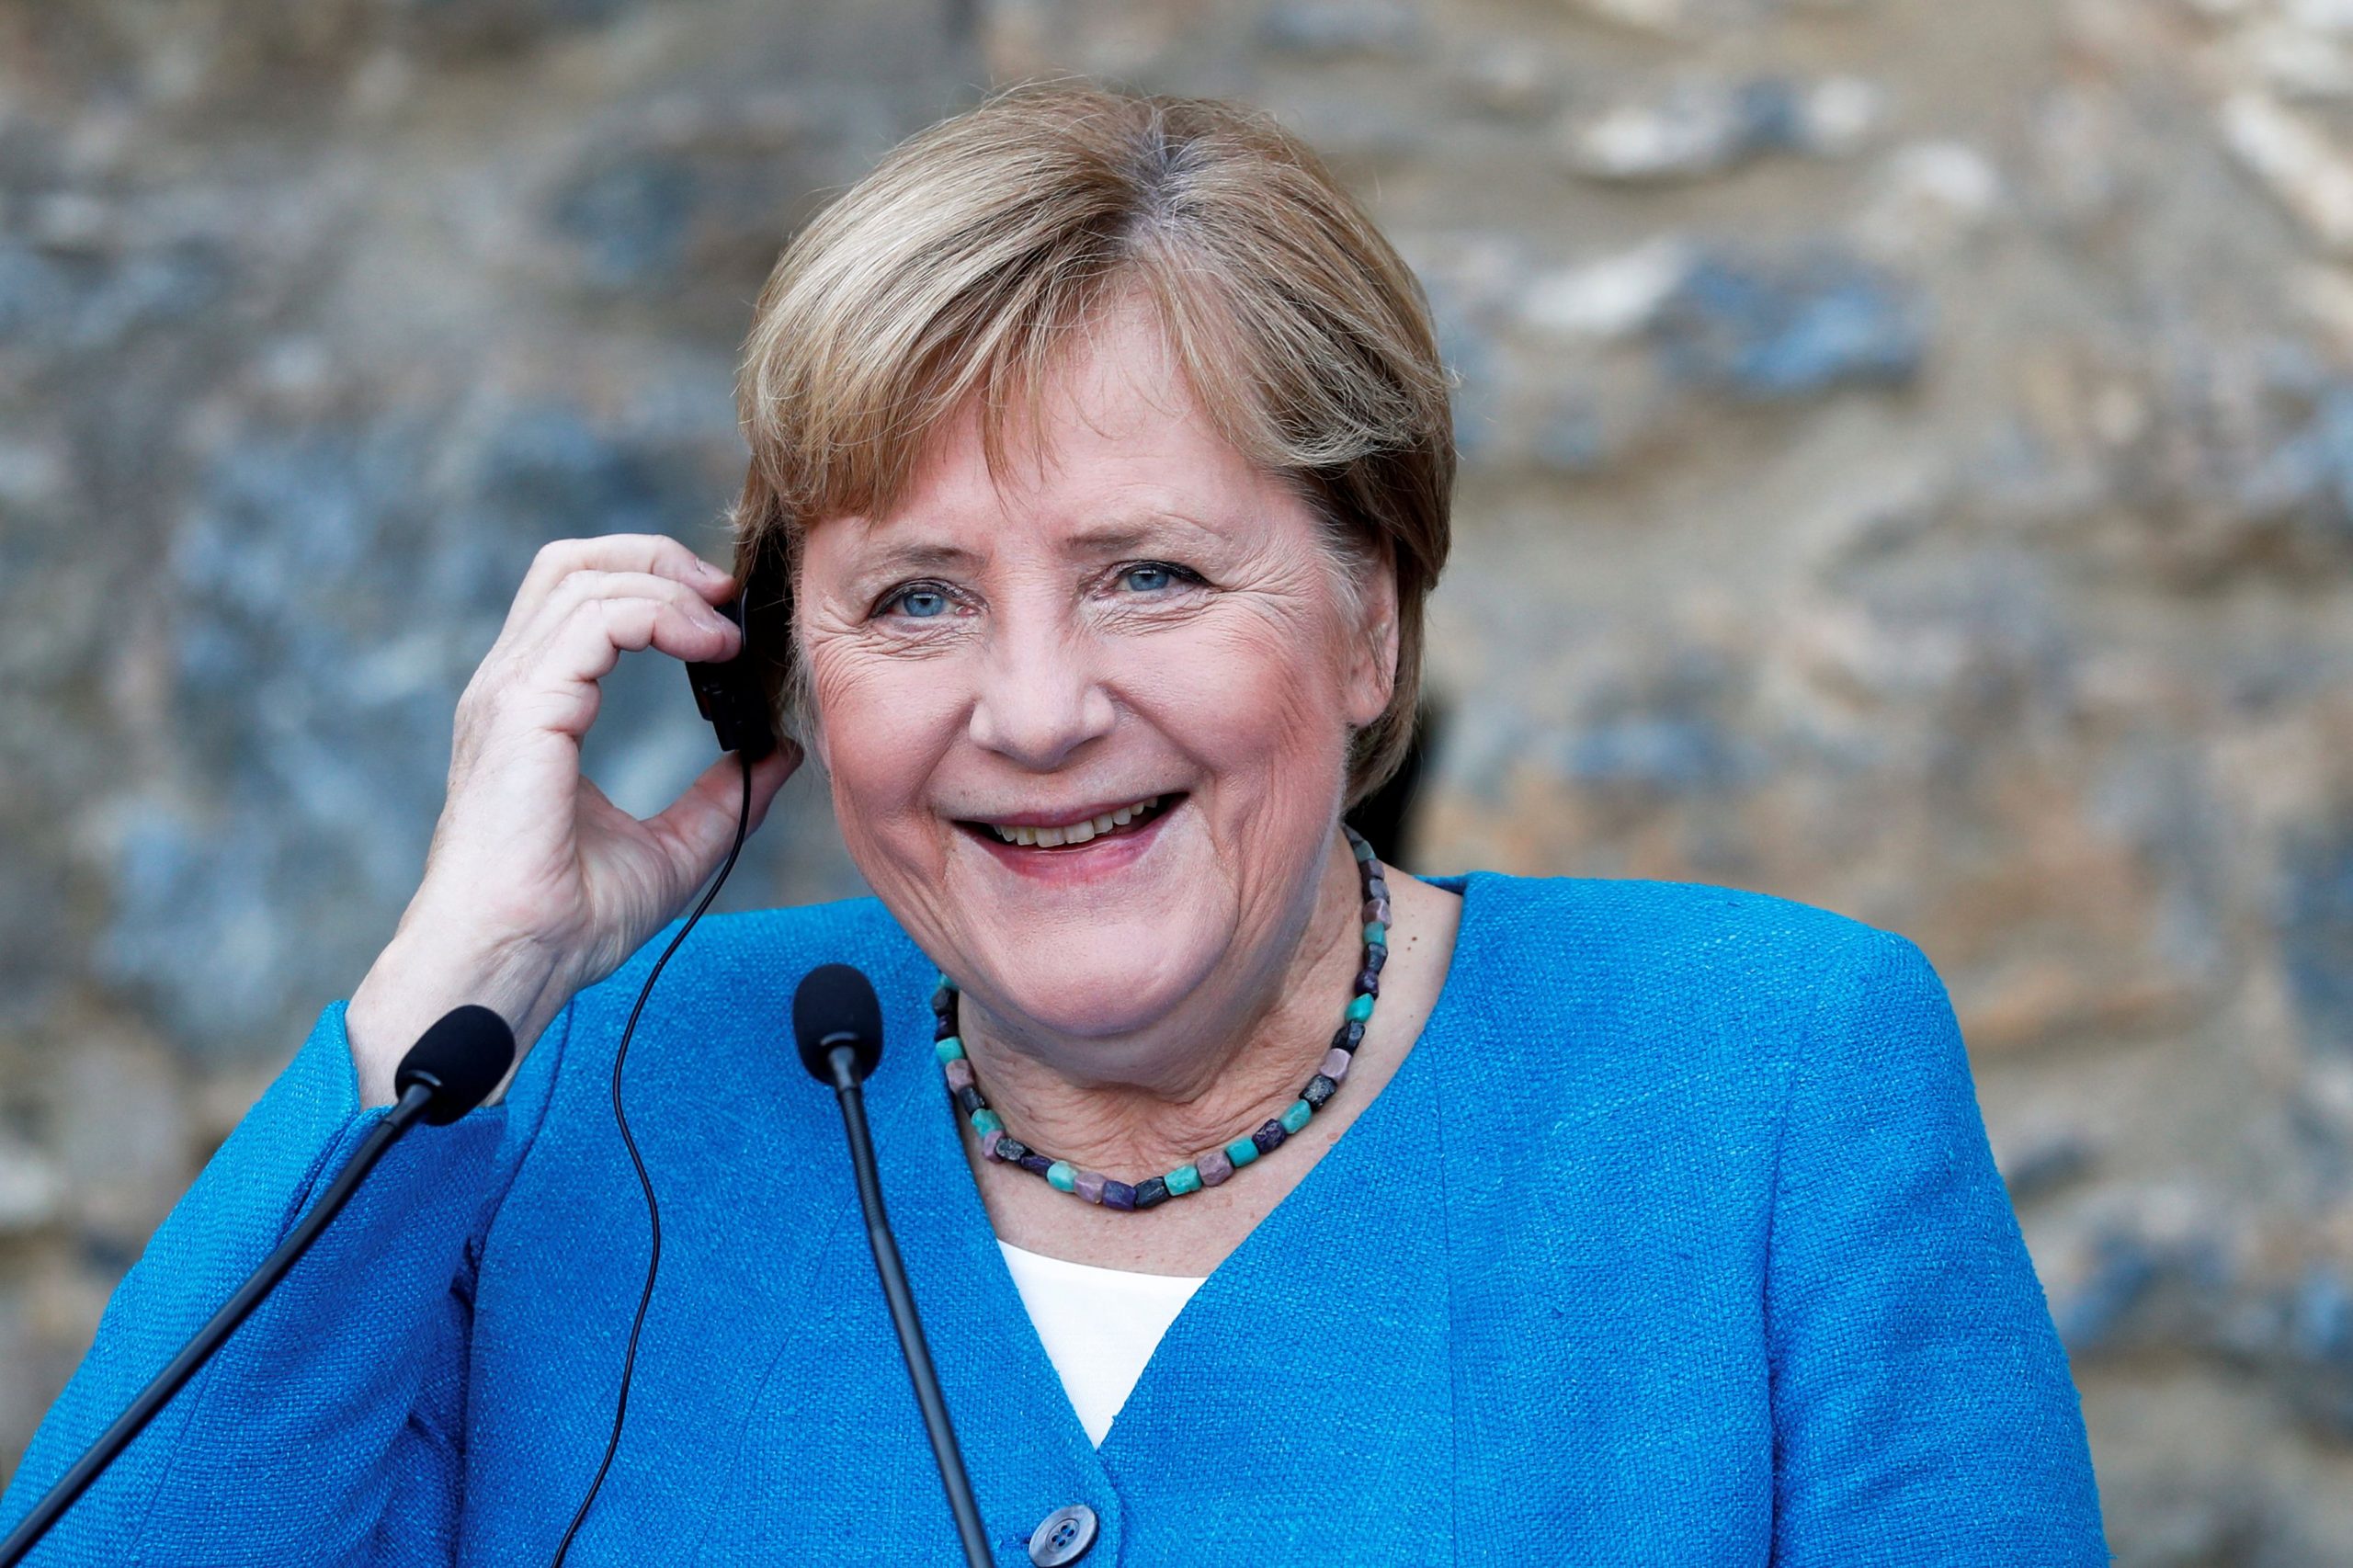 Merkel – Curtains today for her (political) relationship with Greece